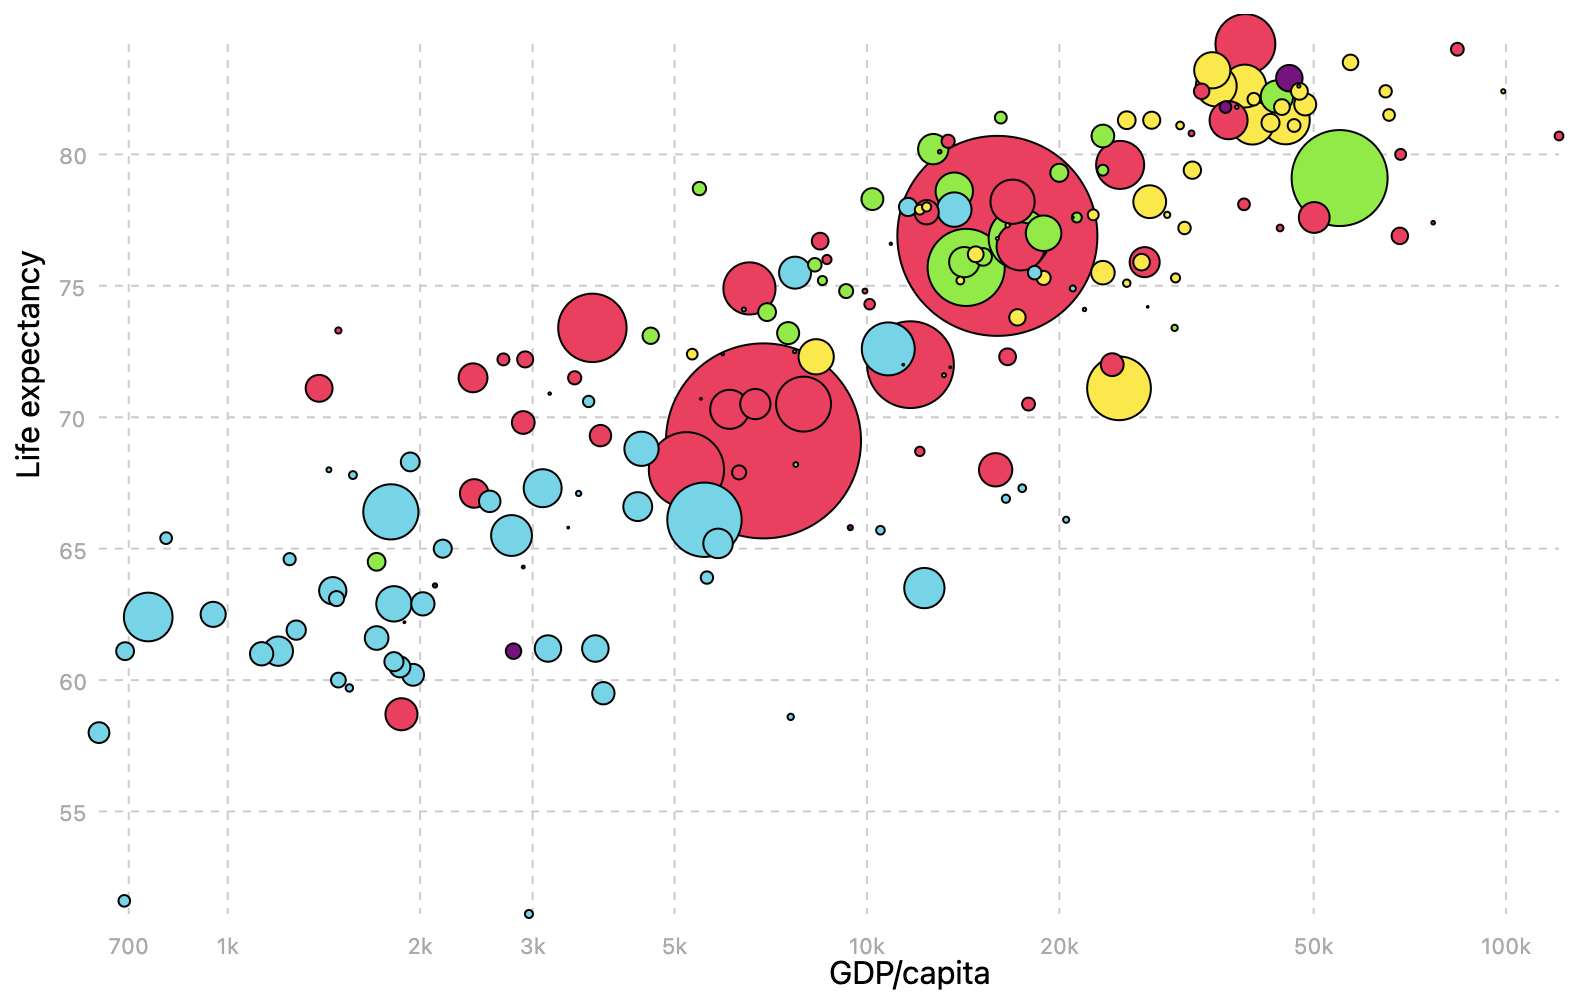 The same scatter plot as above, but with the country circles sized proportional to their population